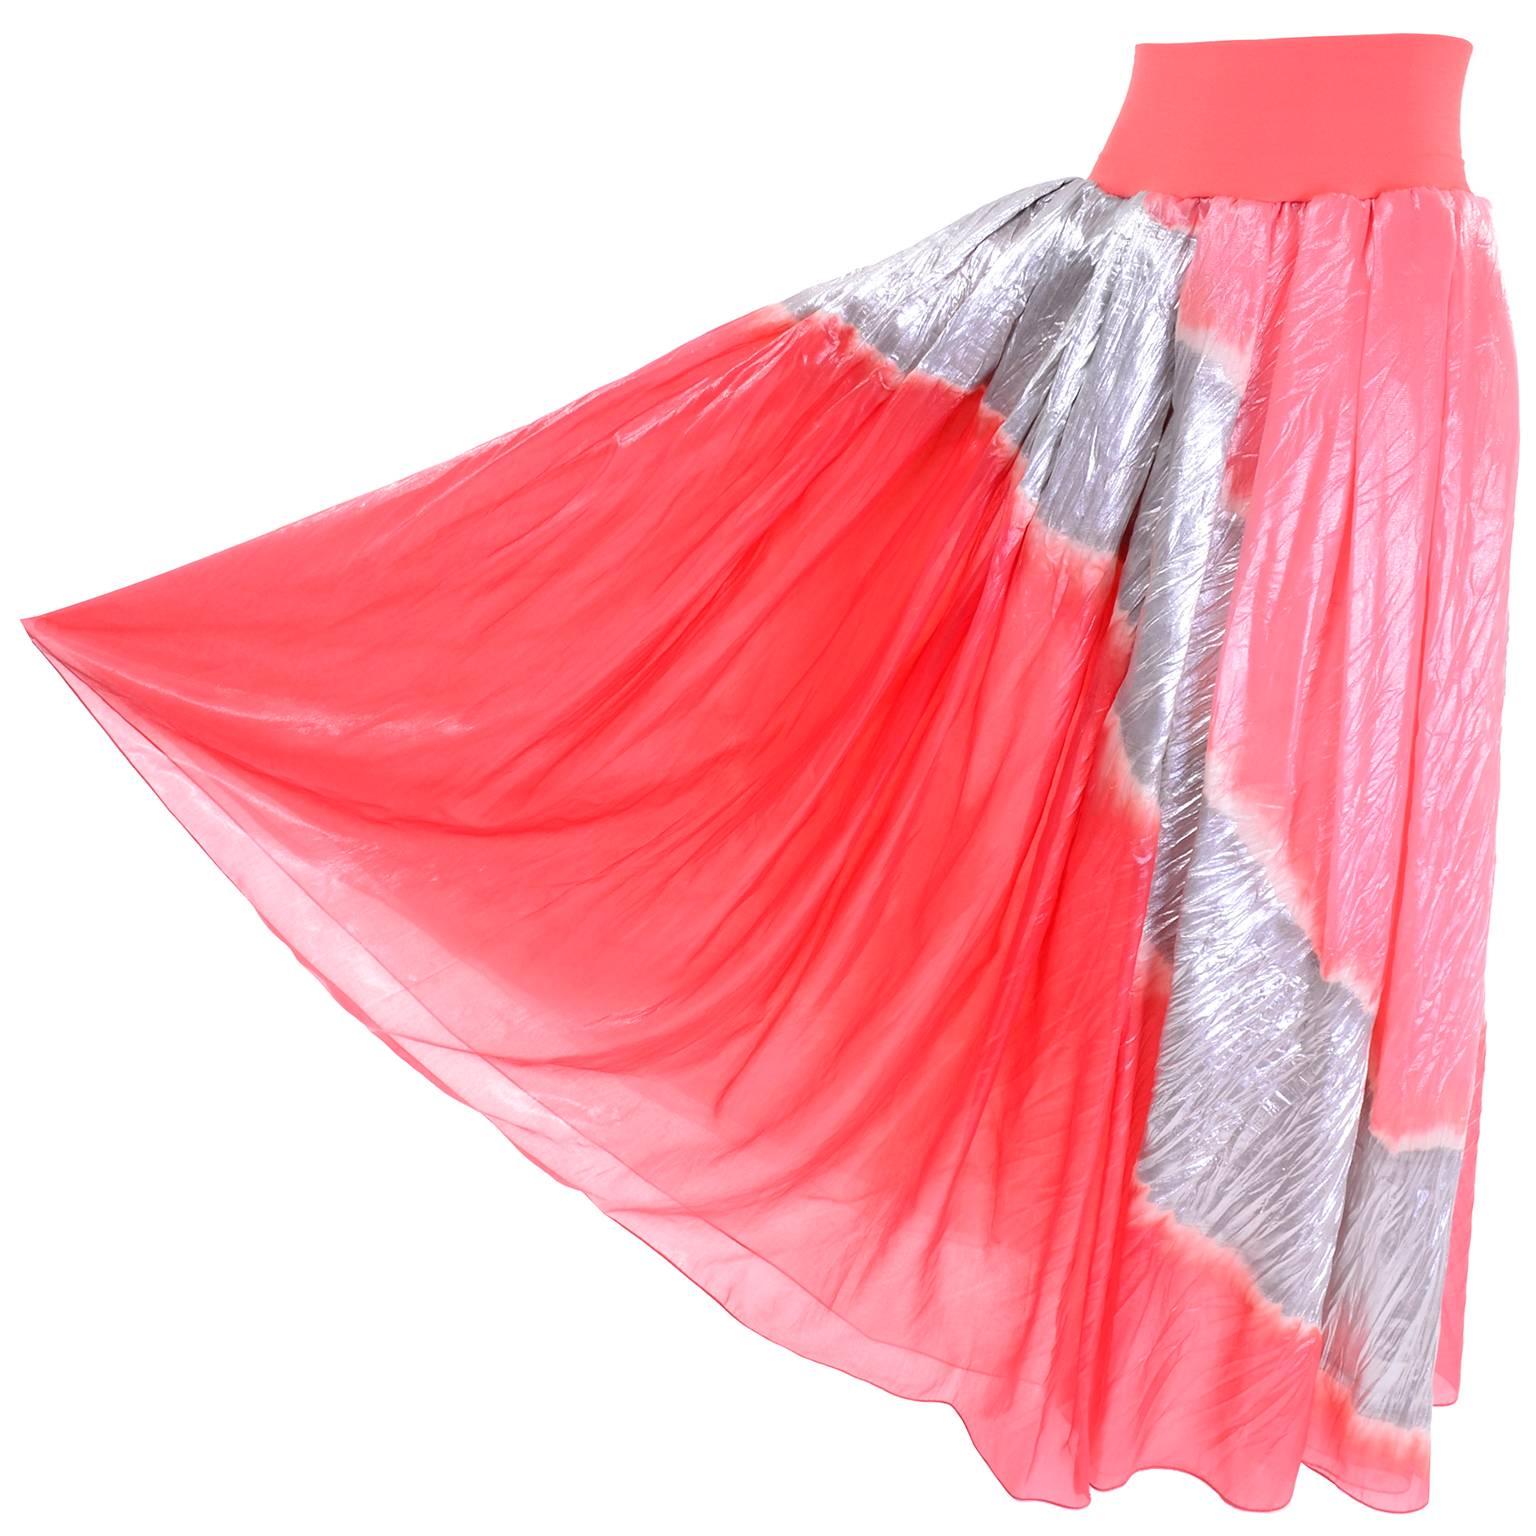 This is an exquisite 1990's long vintage skirt from Donna Karan that is so hard to describe with words! This incredible luxe evening skirt is made of organza and lame. The skirt has a silk jersey waistband and it comes with a fringed ultra fine net